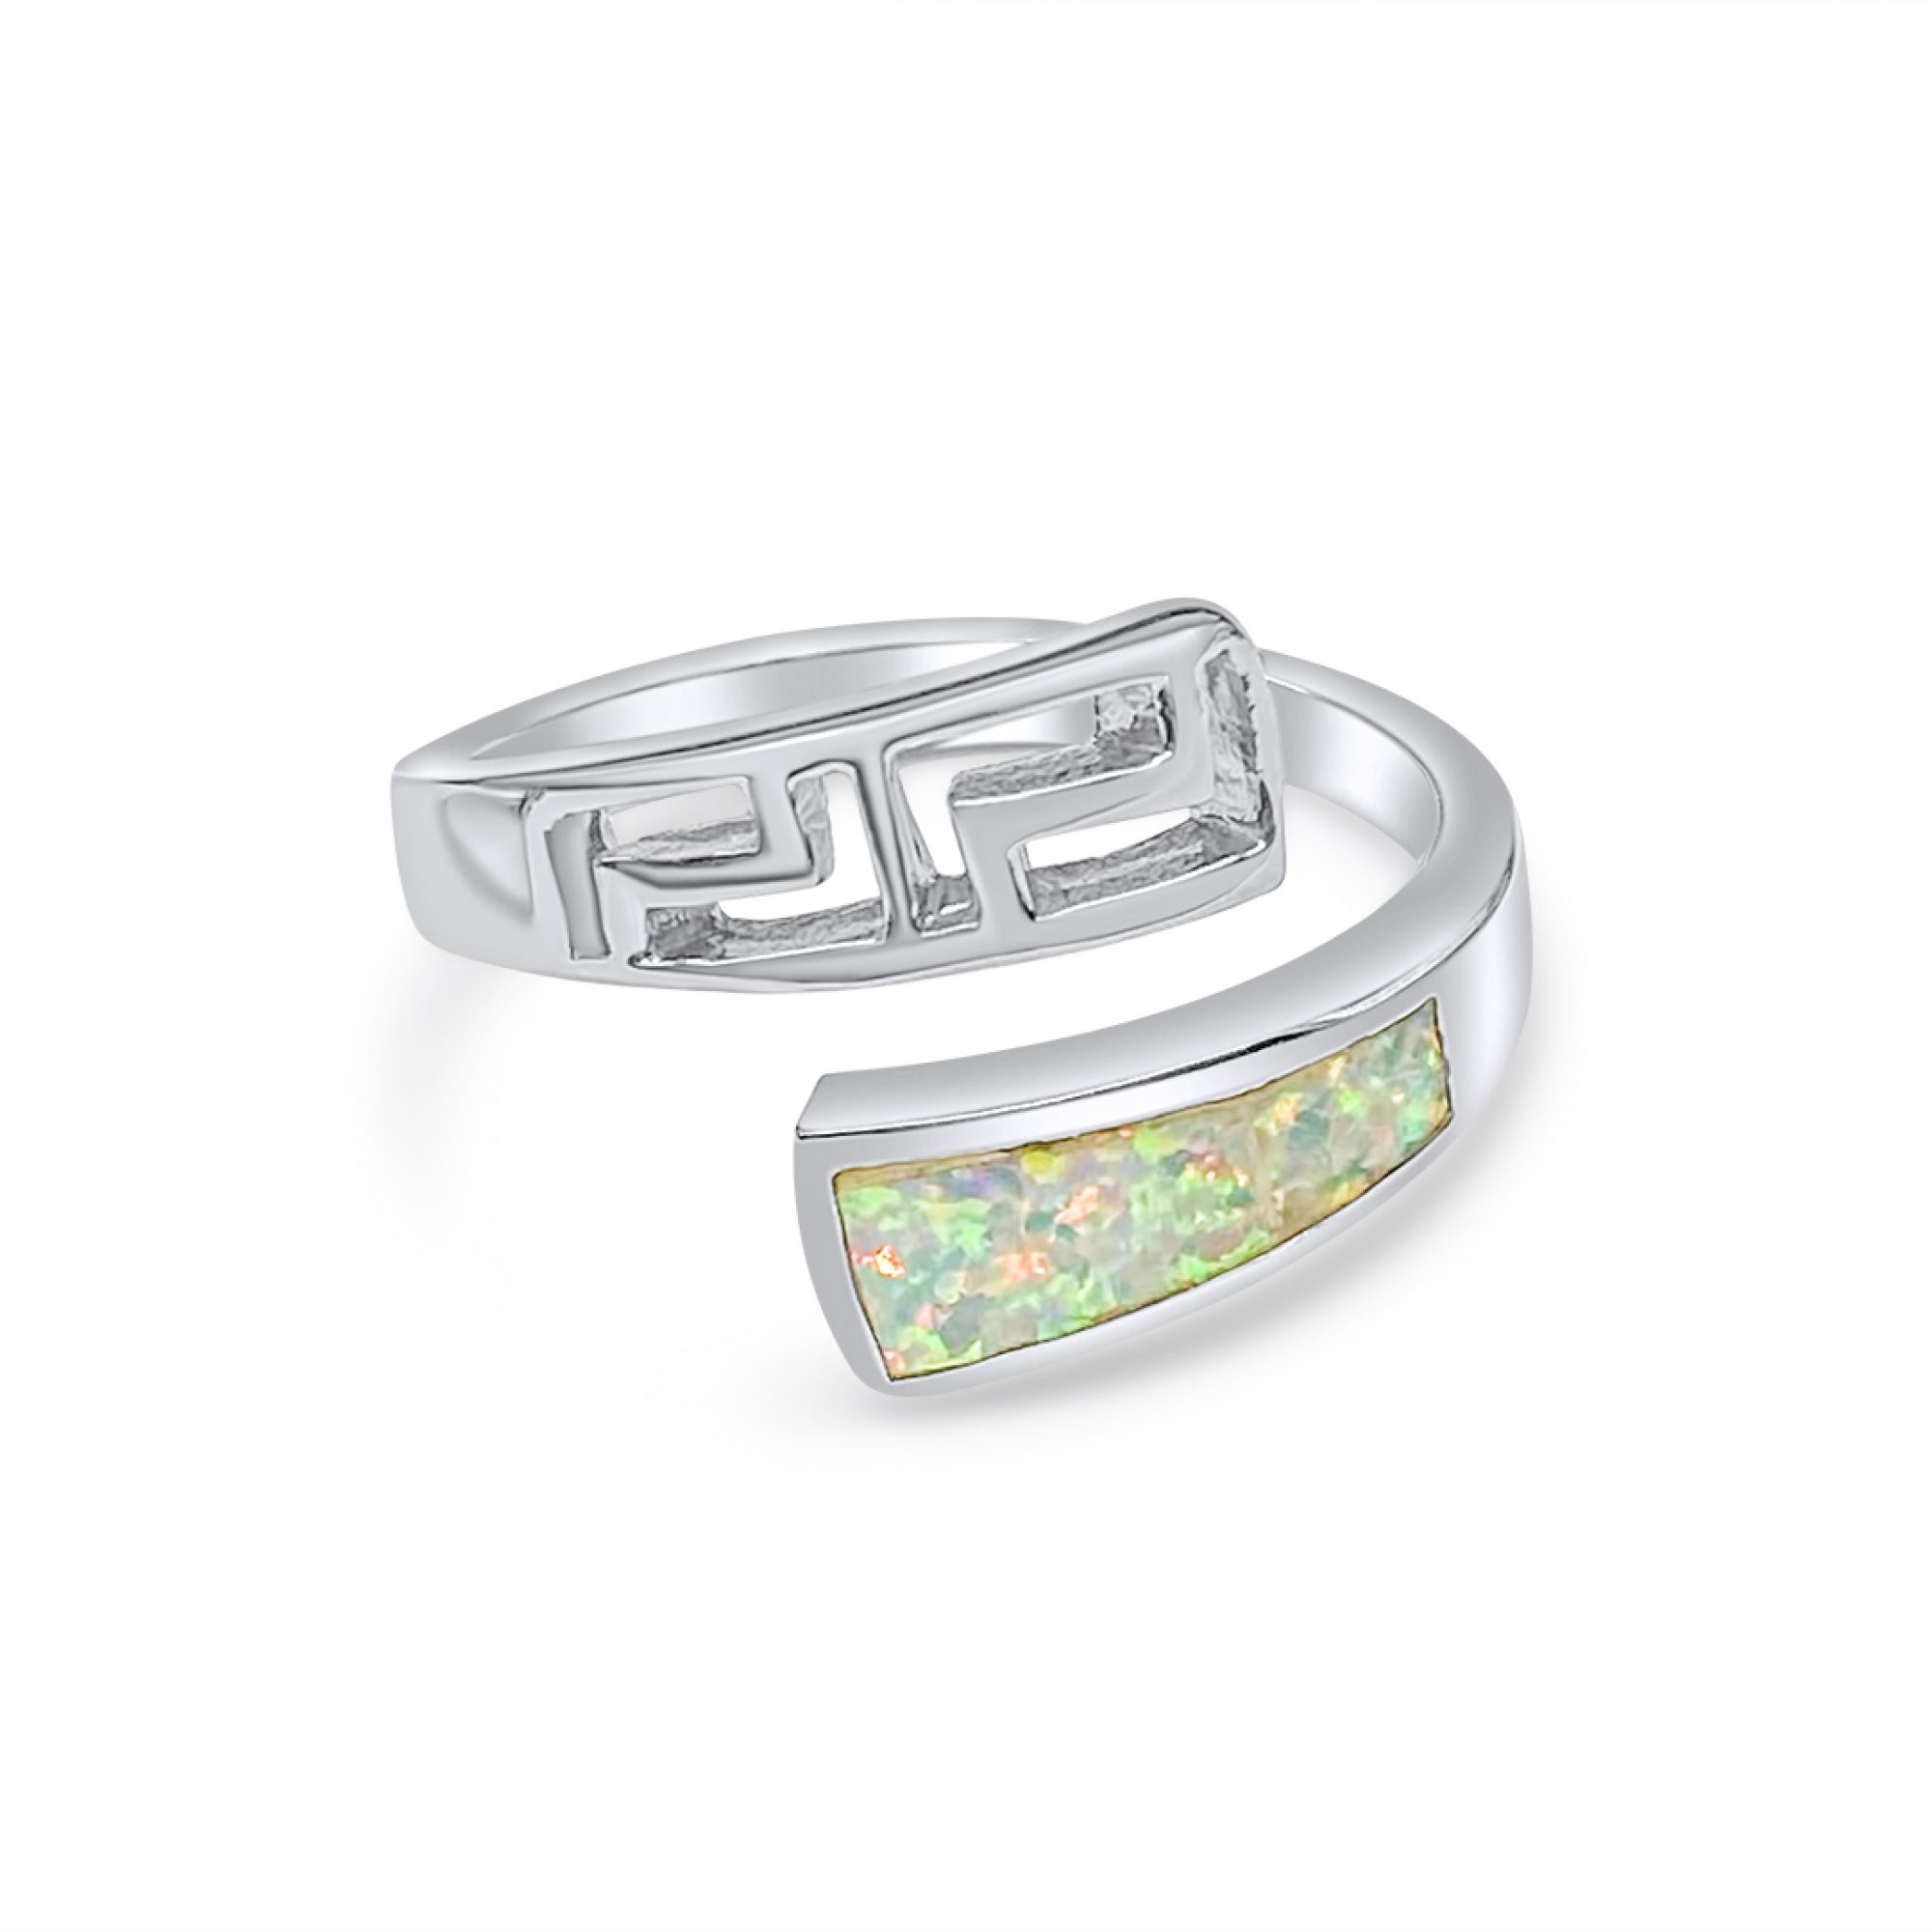 Silver ring with white opal and meander